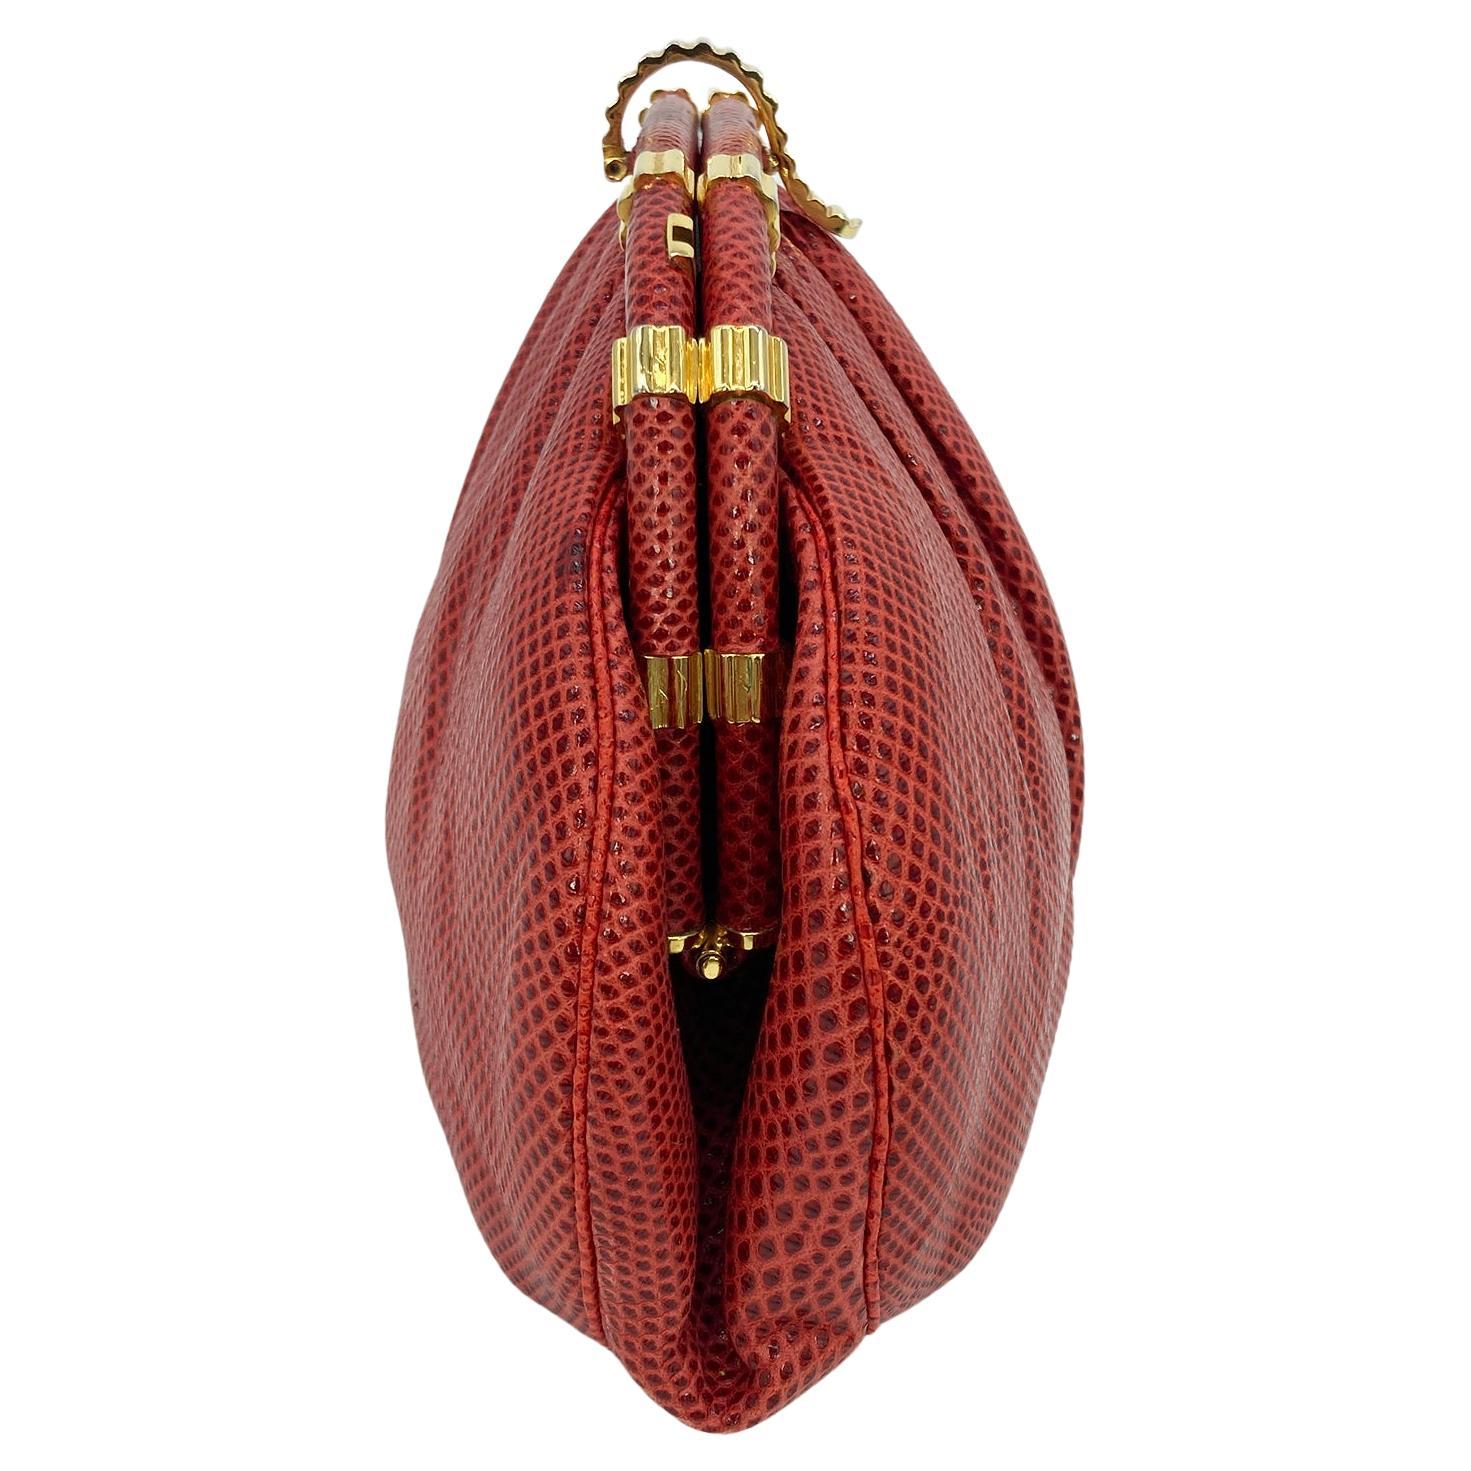 Judith Leiber Red Lizard Clutch in good condition. red lizard leather trimmed with gold hardware. Lift latch closure opens to a red nylon interior with one slit and one zipped side pocket and attached matching red lizard shoulder strap. overall good